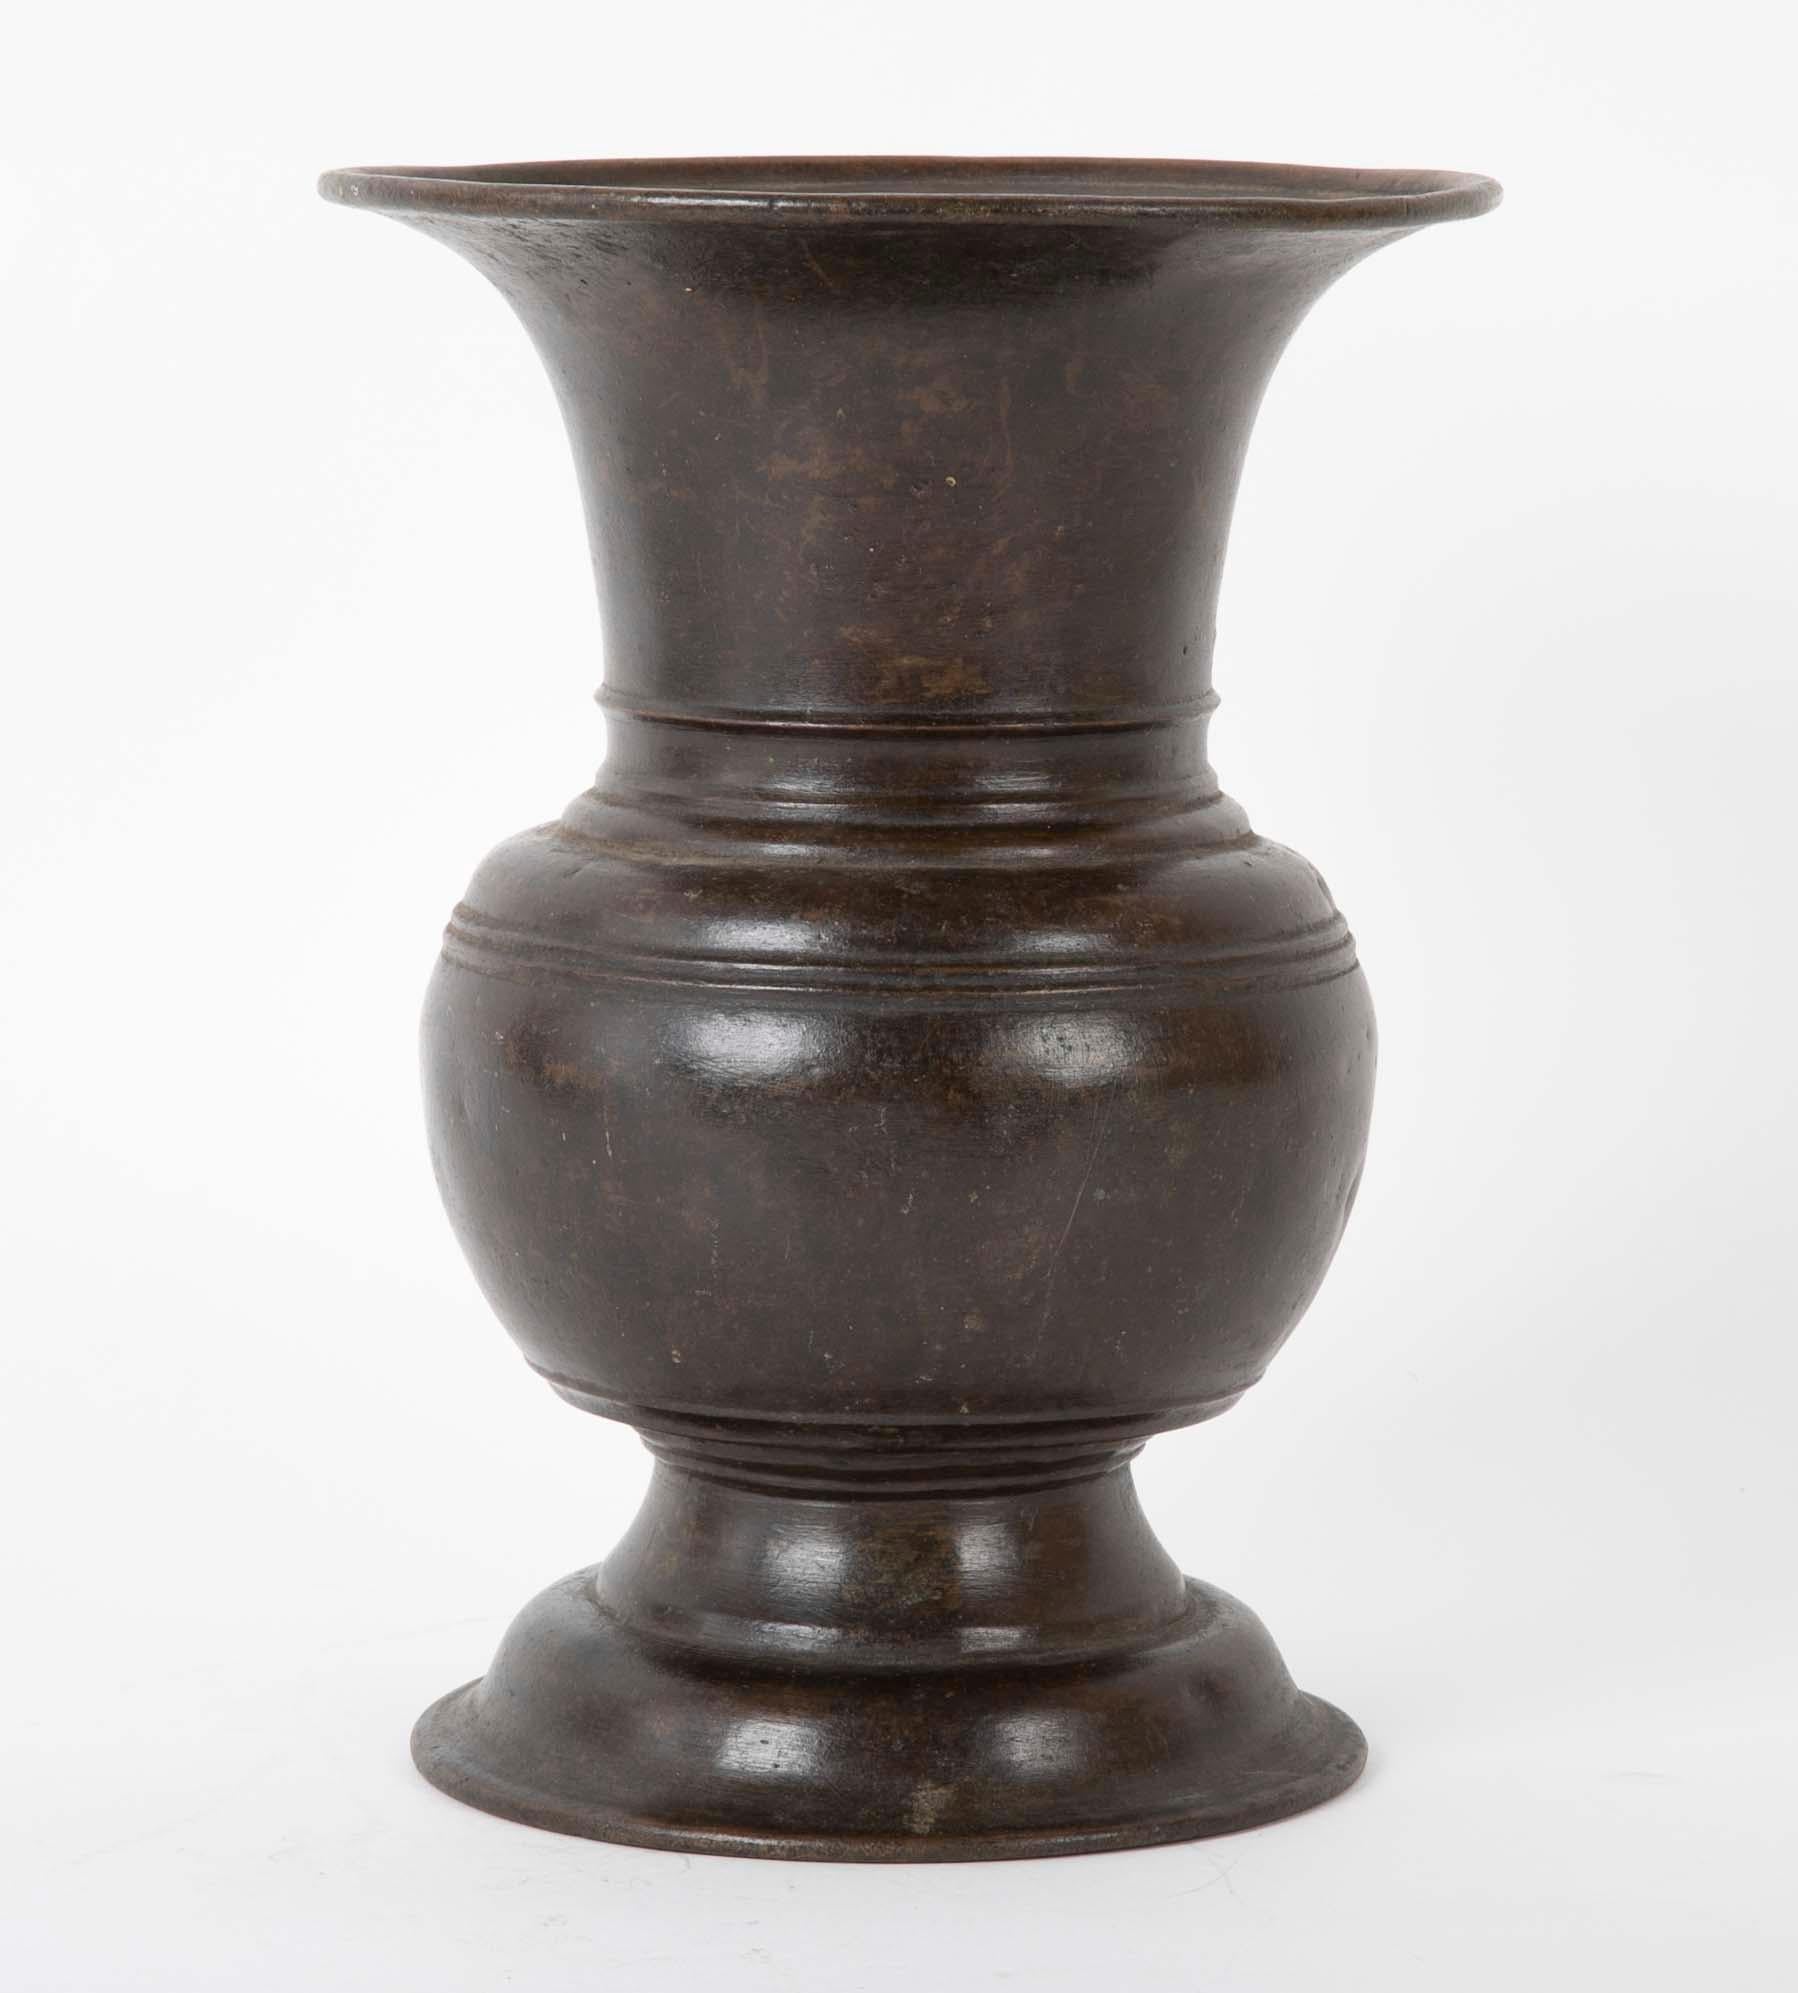 Chinese bronze urn with chocolate brown patina, handsome form with flaring base and top supporting a bulbous center. The classic profile of this piece will make a stunning vase.